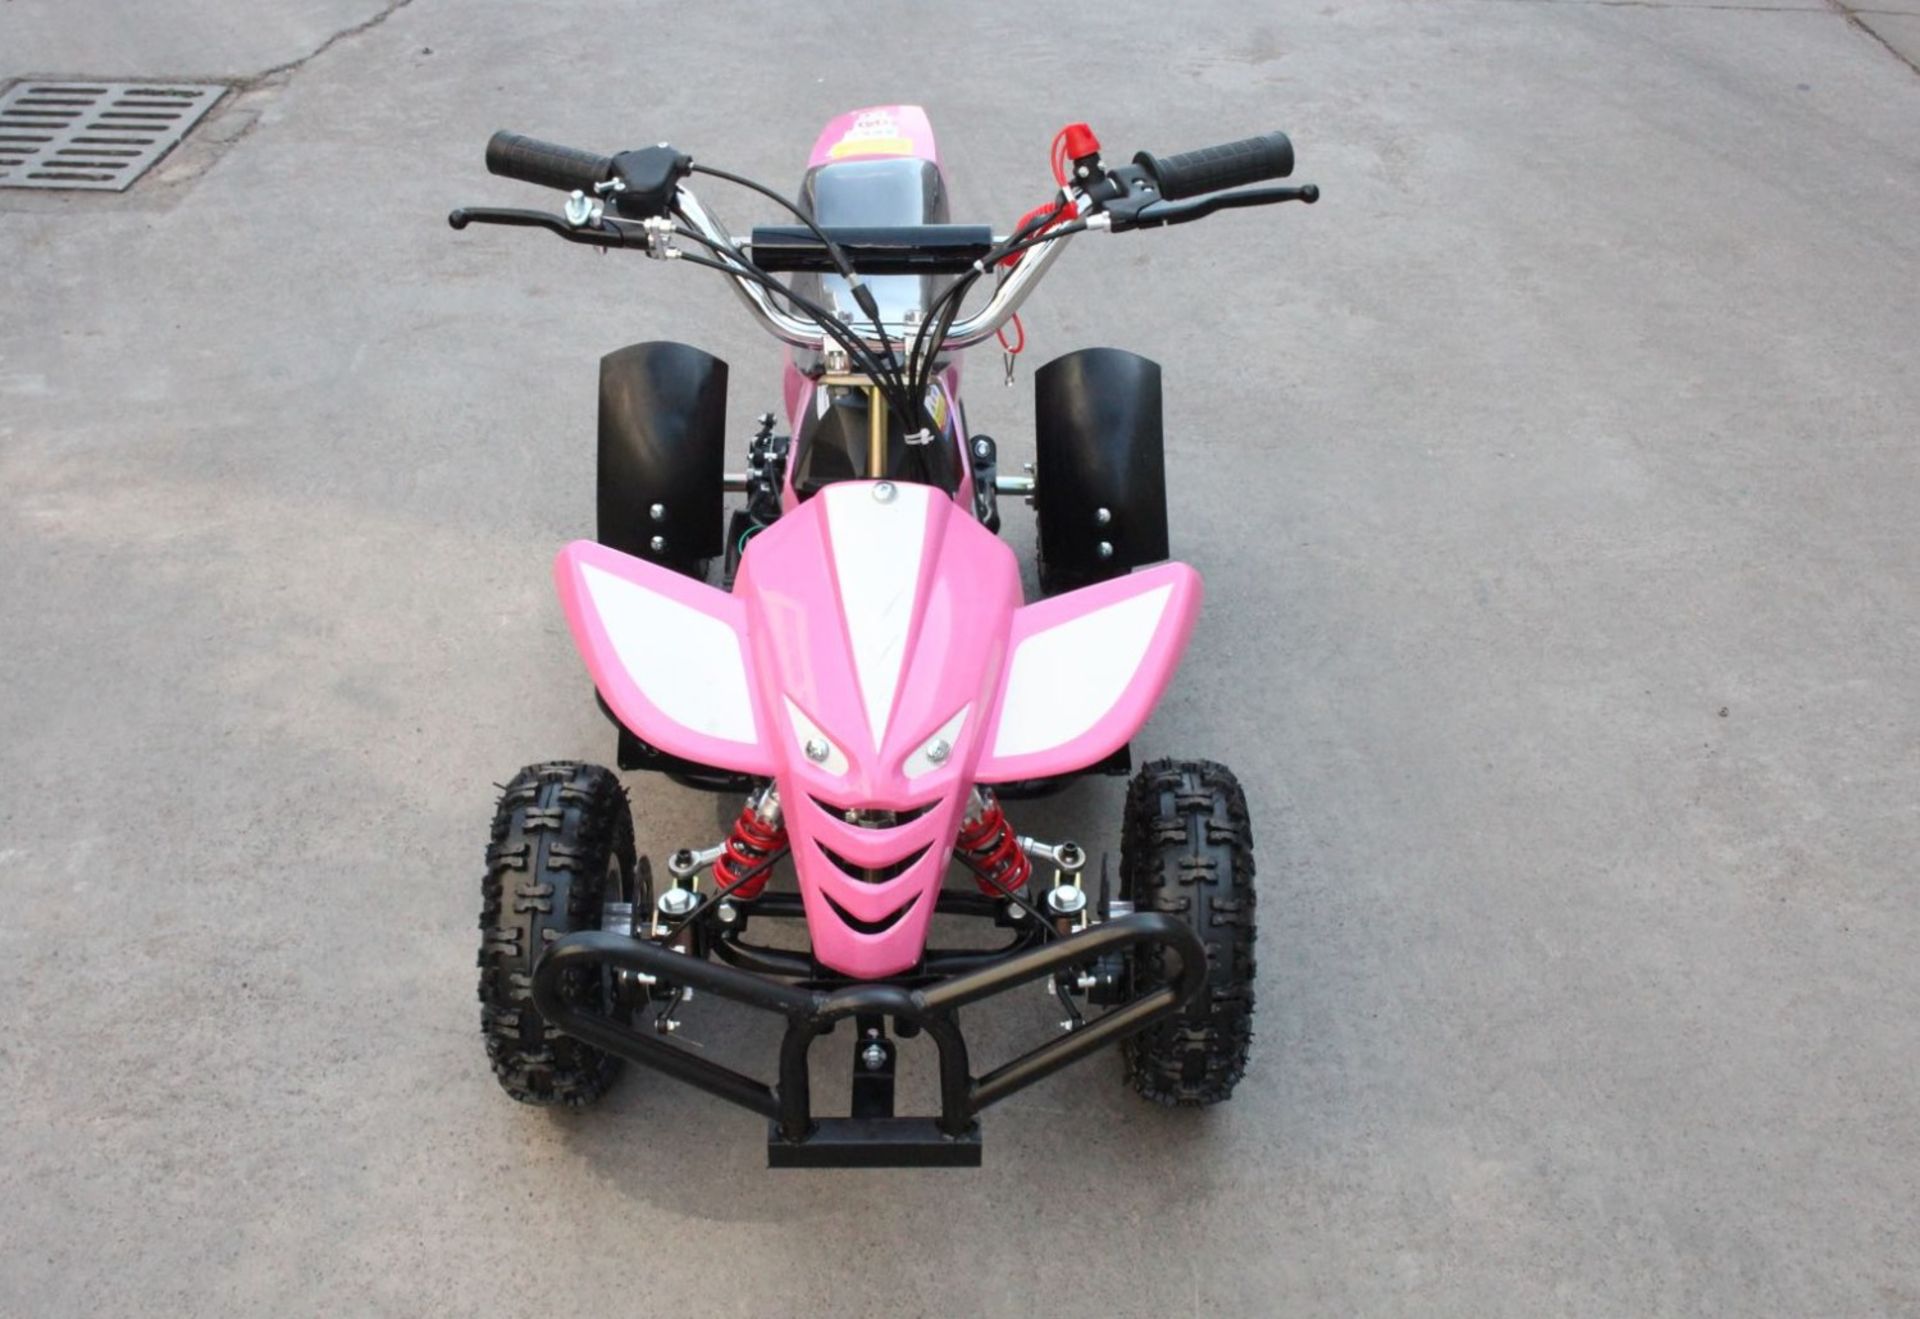 + VAT Brand New 50cc Mini Quad Bike FRM - Colours May Vary - Picture May Vary From Actual Item - Bild 4 aus 9